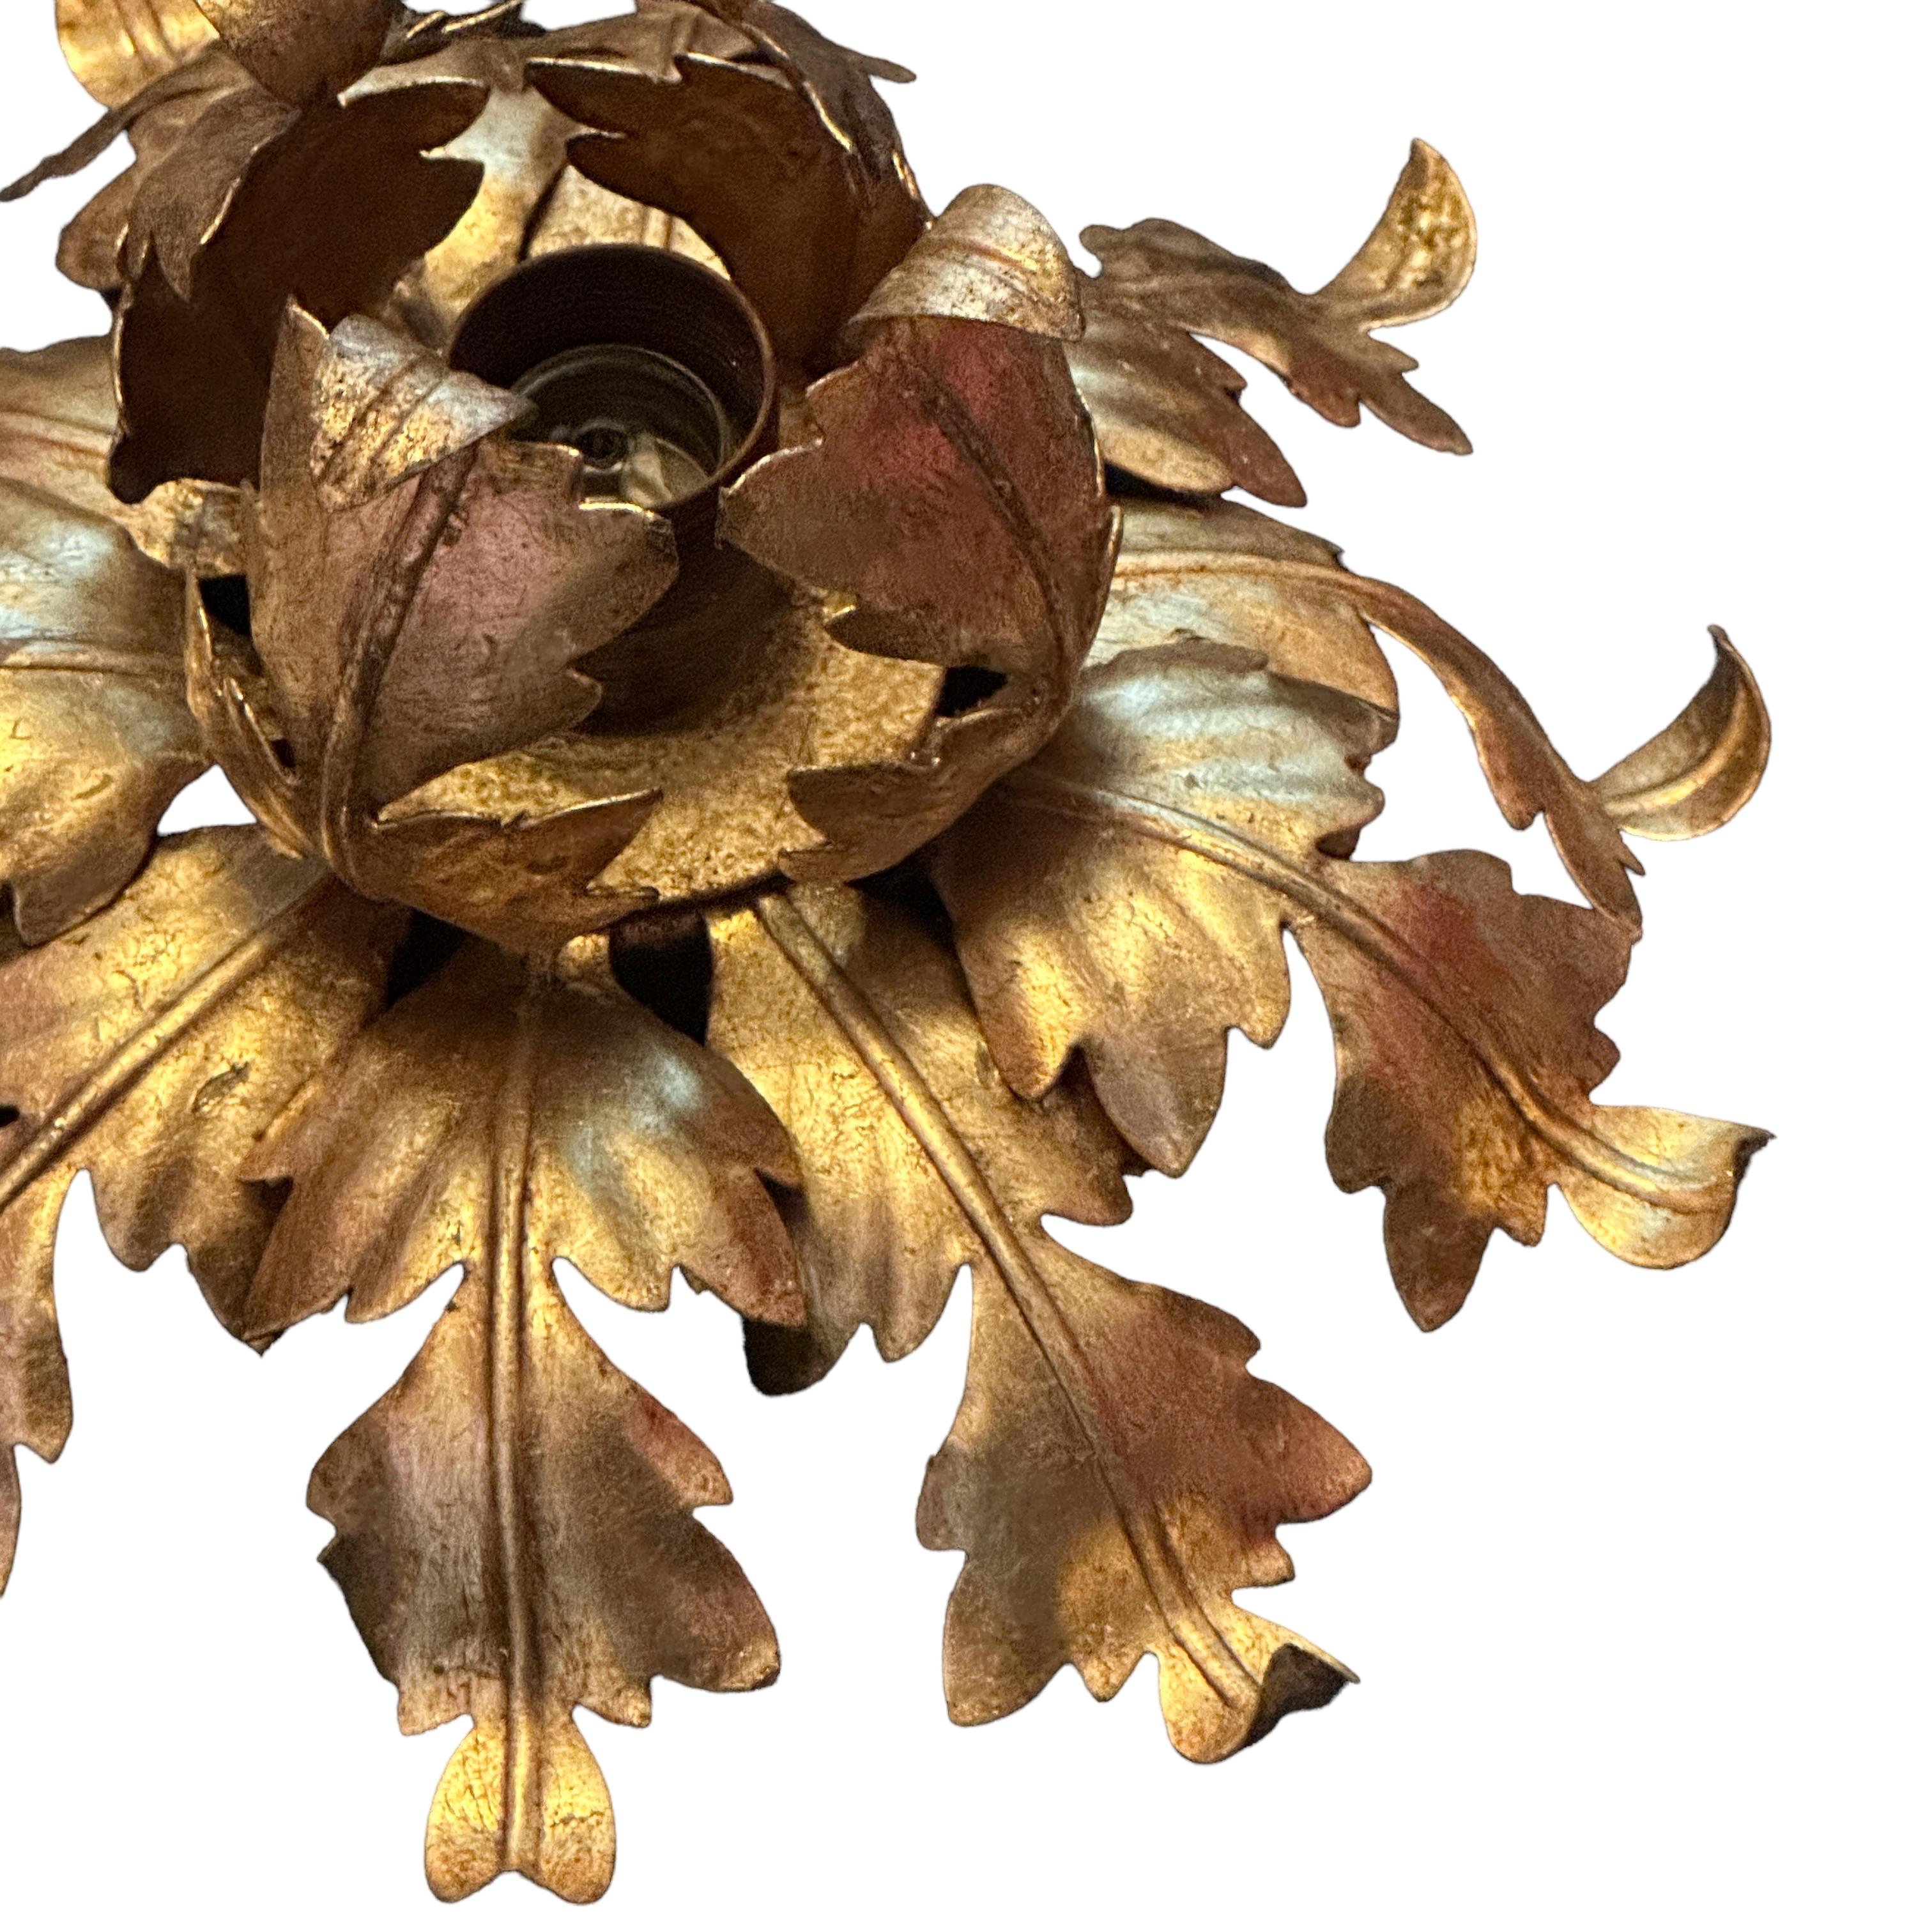 Add a touch of opulence to your home with this charming flush mount. Perfect gilt metal leafs to enhance any chic or eclectic home. We'd love to see it hanging in an entryway as a charming welcome home. Built in the 1960s, attributed to Banci